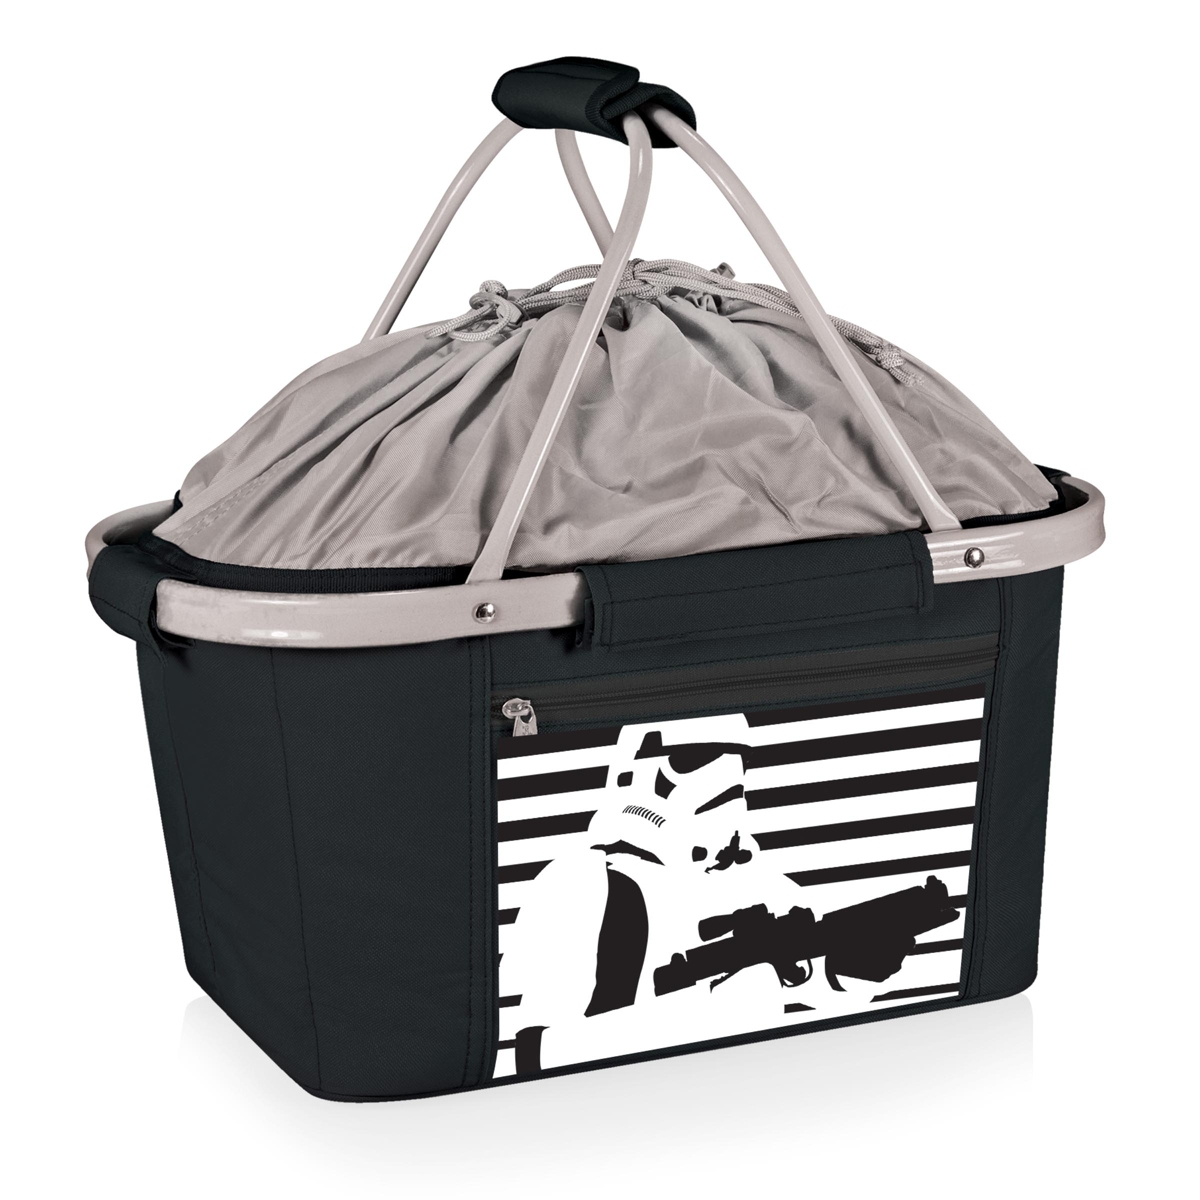 Oniva by Picnic Time Star Wars Stormtrooper Metro Basket Collapsible Cooler Tote - Black